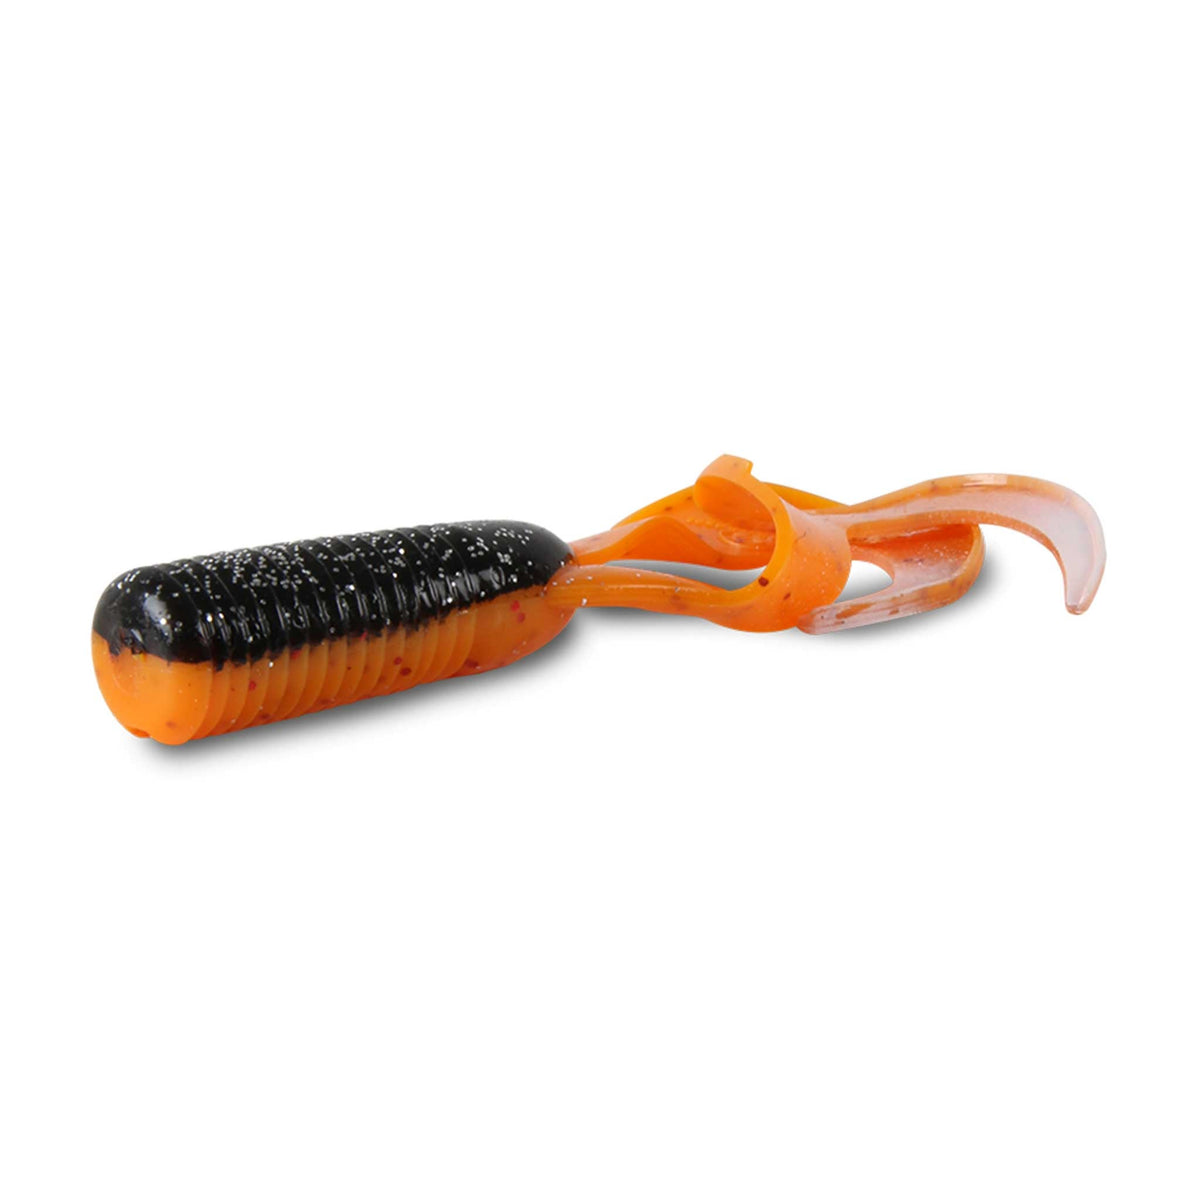 Strike Pro Double Tail Big Derg Wisper Replacement Tails